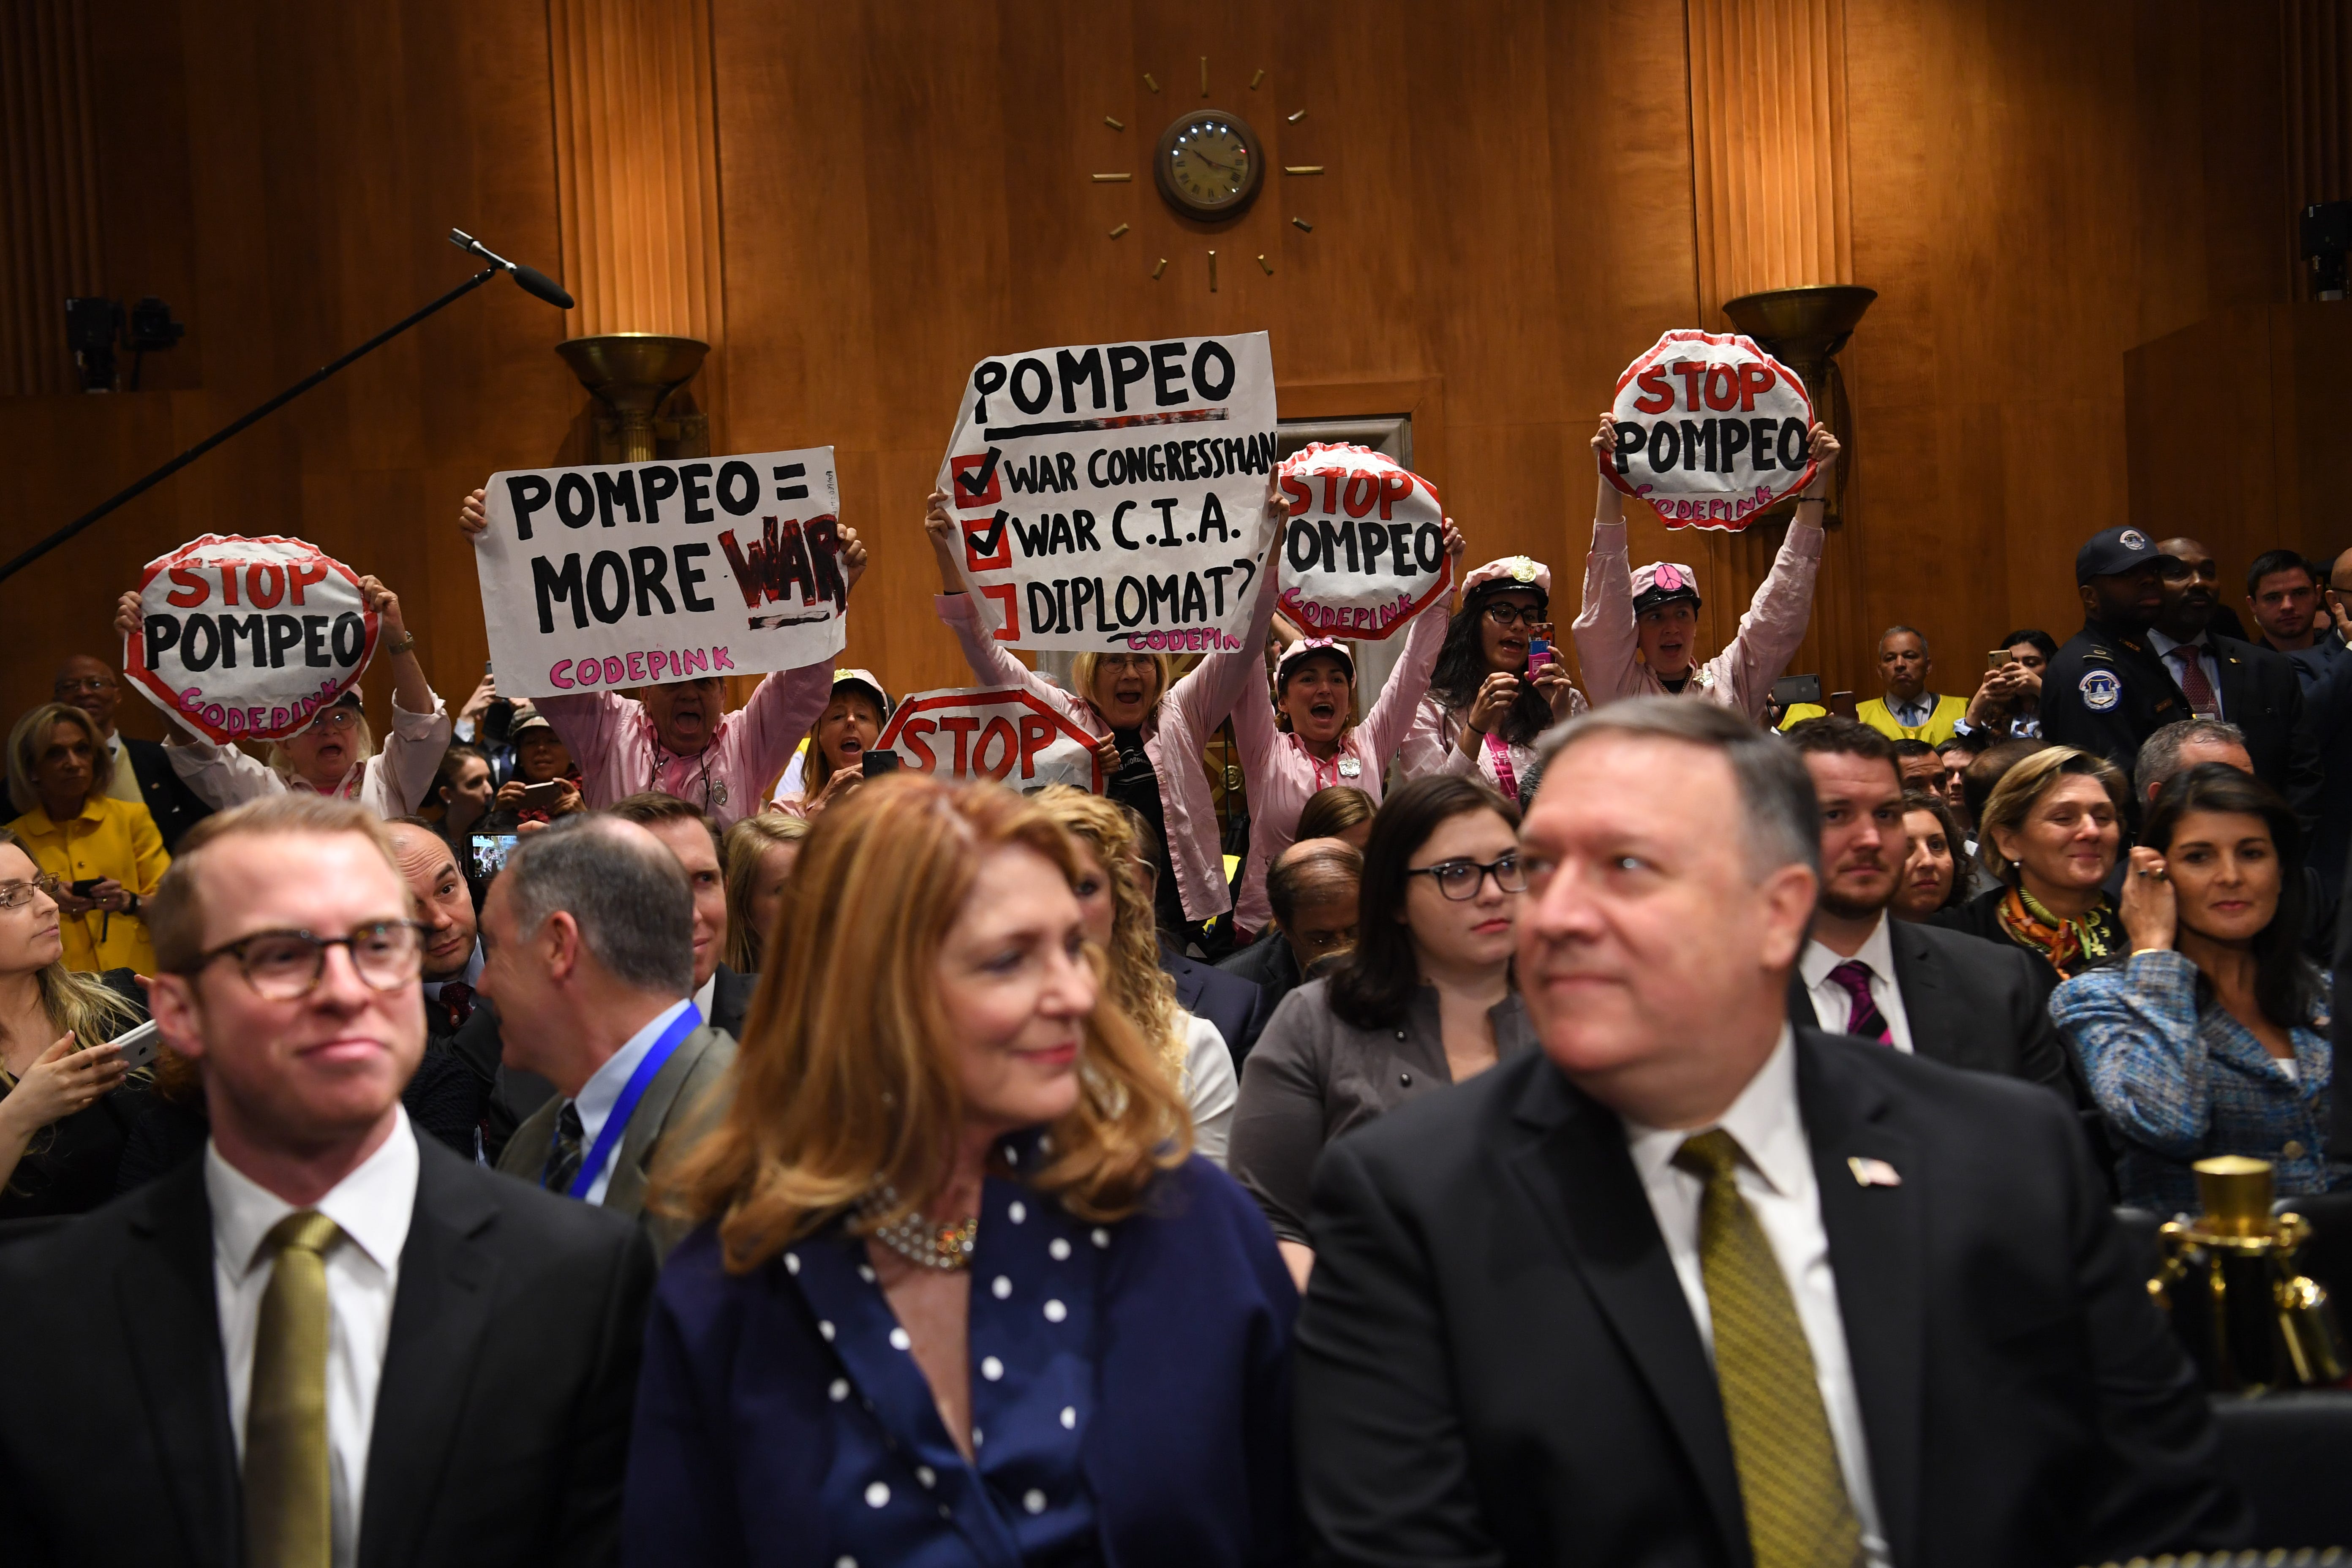 Protestors hold signs from the CODEPINK grassroots anti-war group in the back of the hearing room while Mike Pompeo (R) sits with his wife Susan Pompeo (C) ahead of his scheduled testimony before the Senate Foreign Relations Committee during his conf